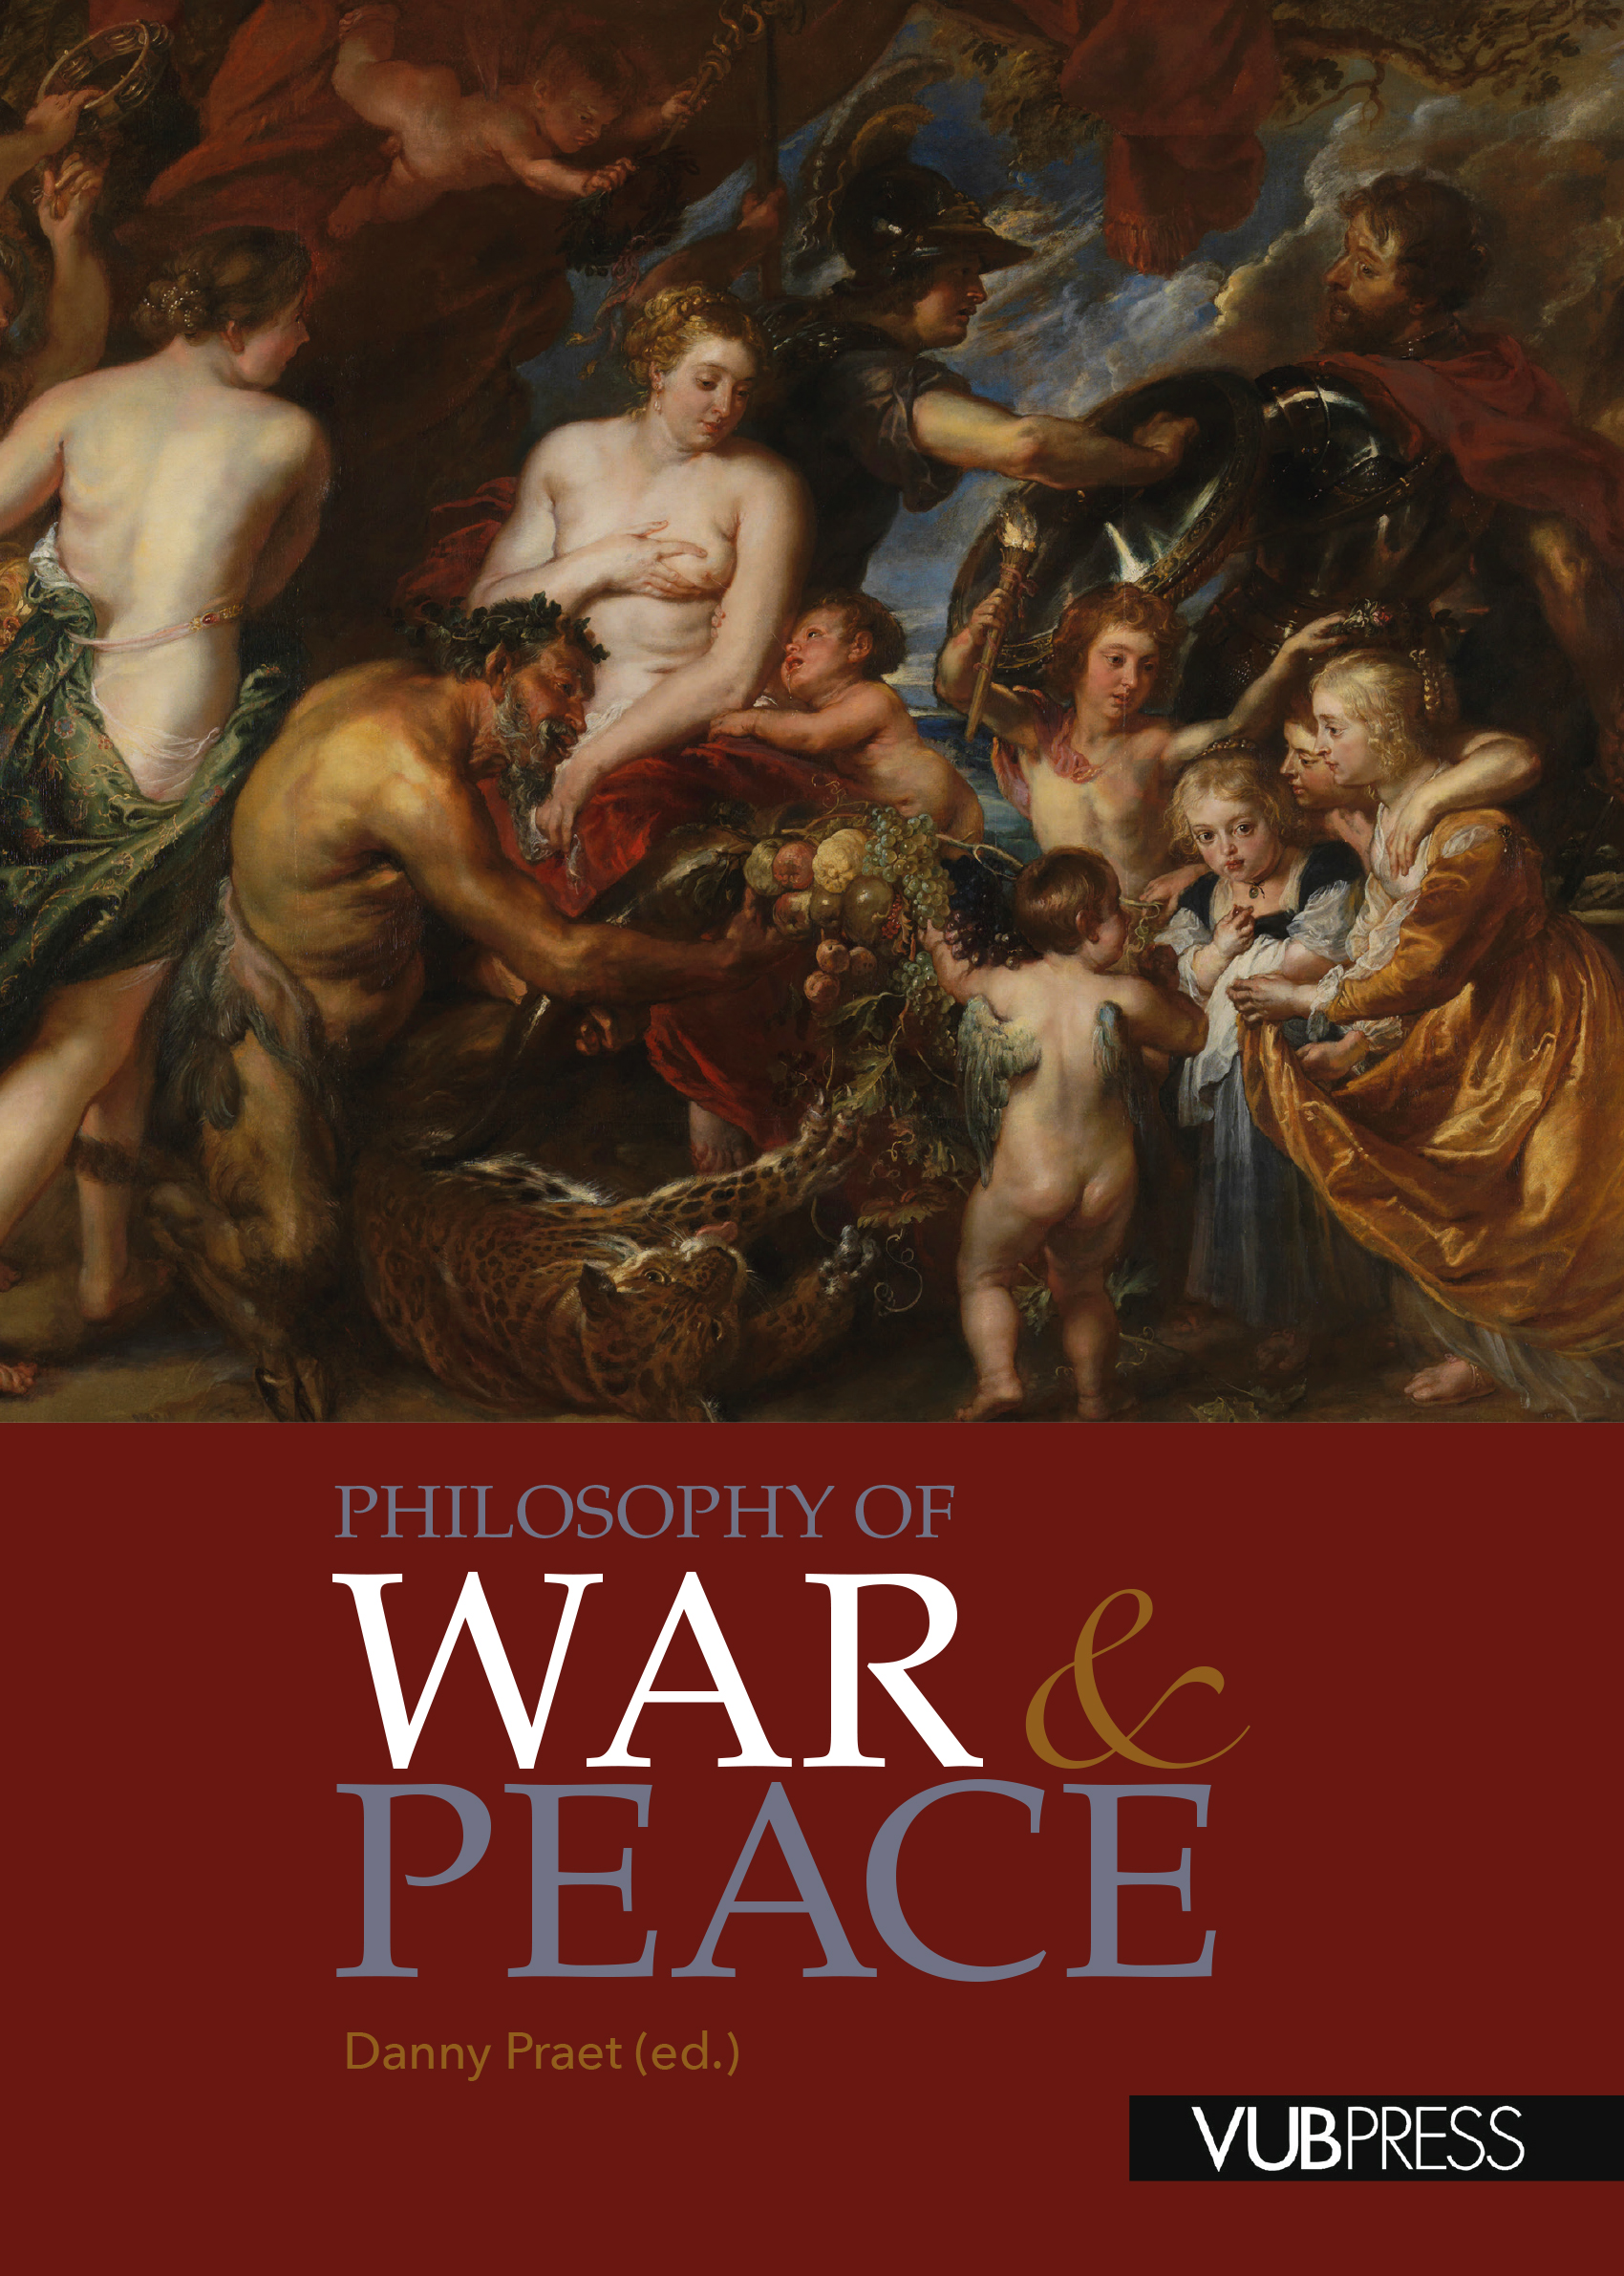 PHILOSOPHY OF WAR AND PEACE